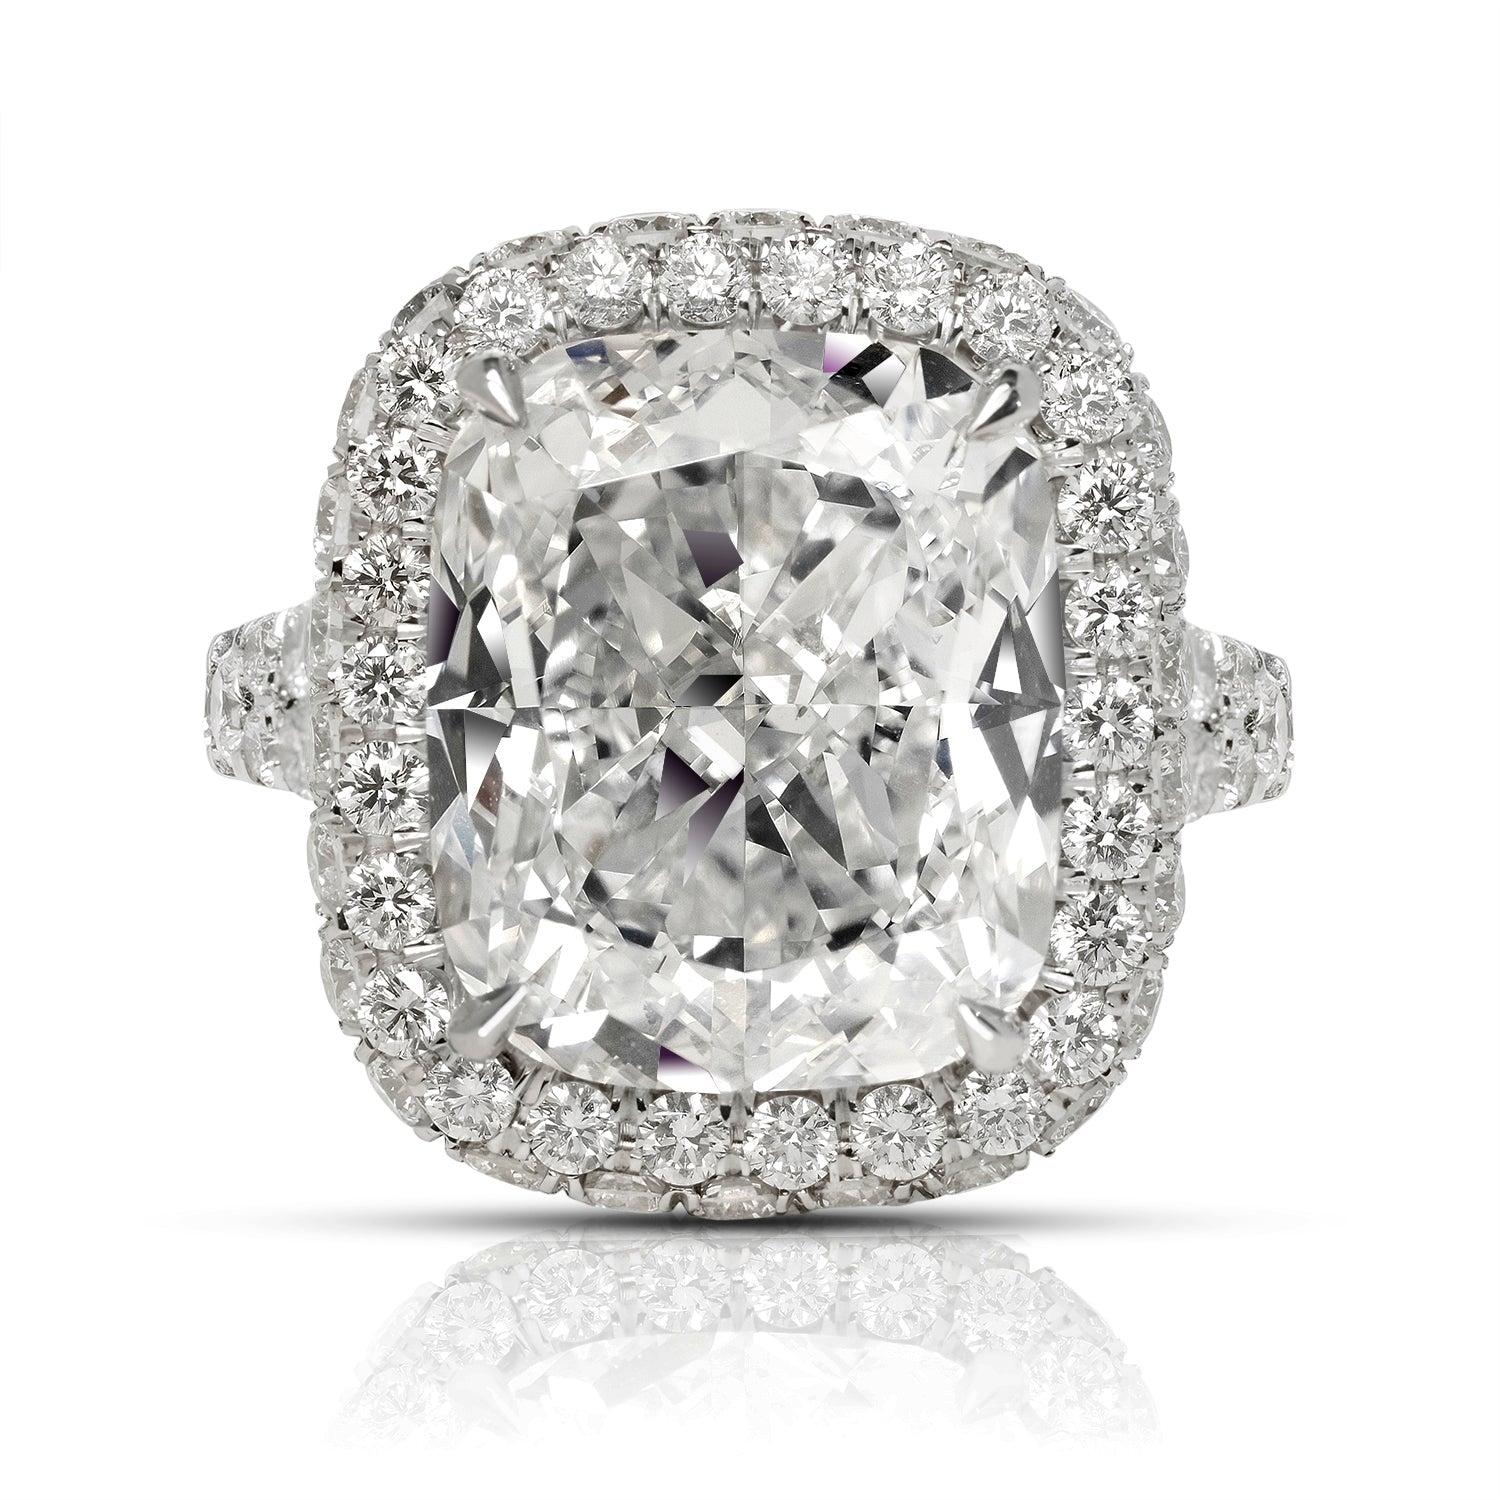 HAZEL DIAMOND ENGAGEMENT PLATINIUM RING BY MIKE NEKTA
GIA CERTIFIED

Center Diamond:
Carat Weight: 10.72 Carats
Color : E*
Clarity: VVS2
Style: CUSHION MODIFIED BRILLIANT
Approximate Measurements: 13.9 x 11.6 x 7.5 mm
* This diamond has been treated